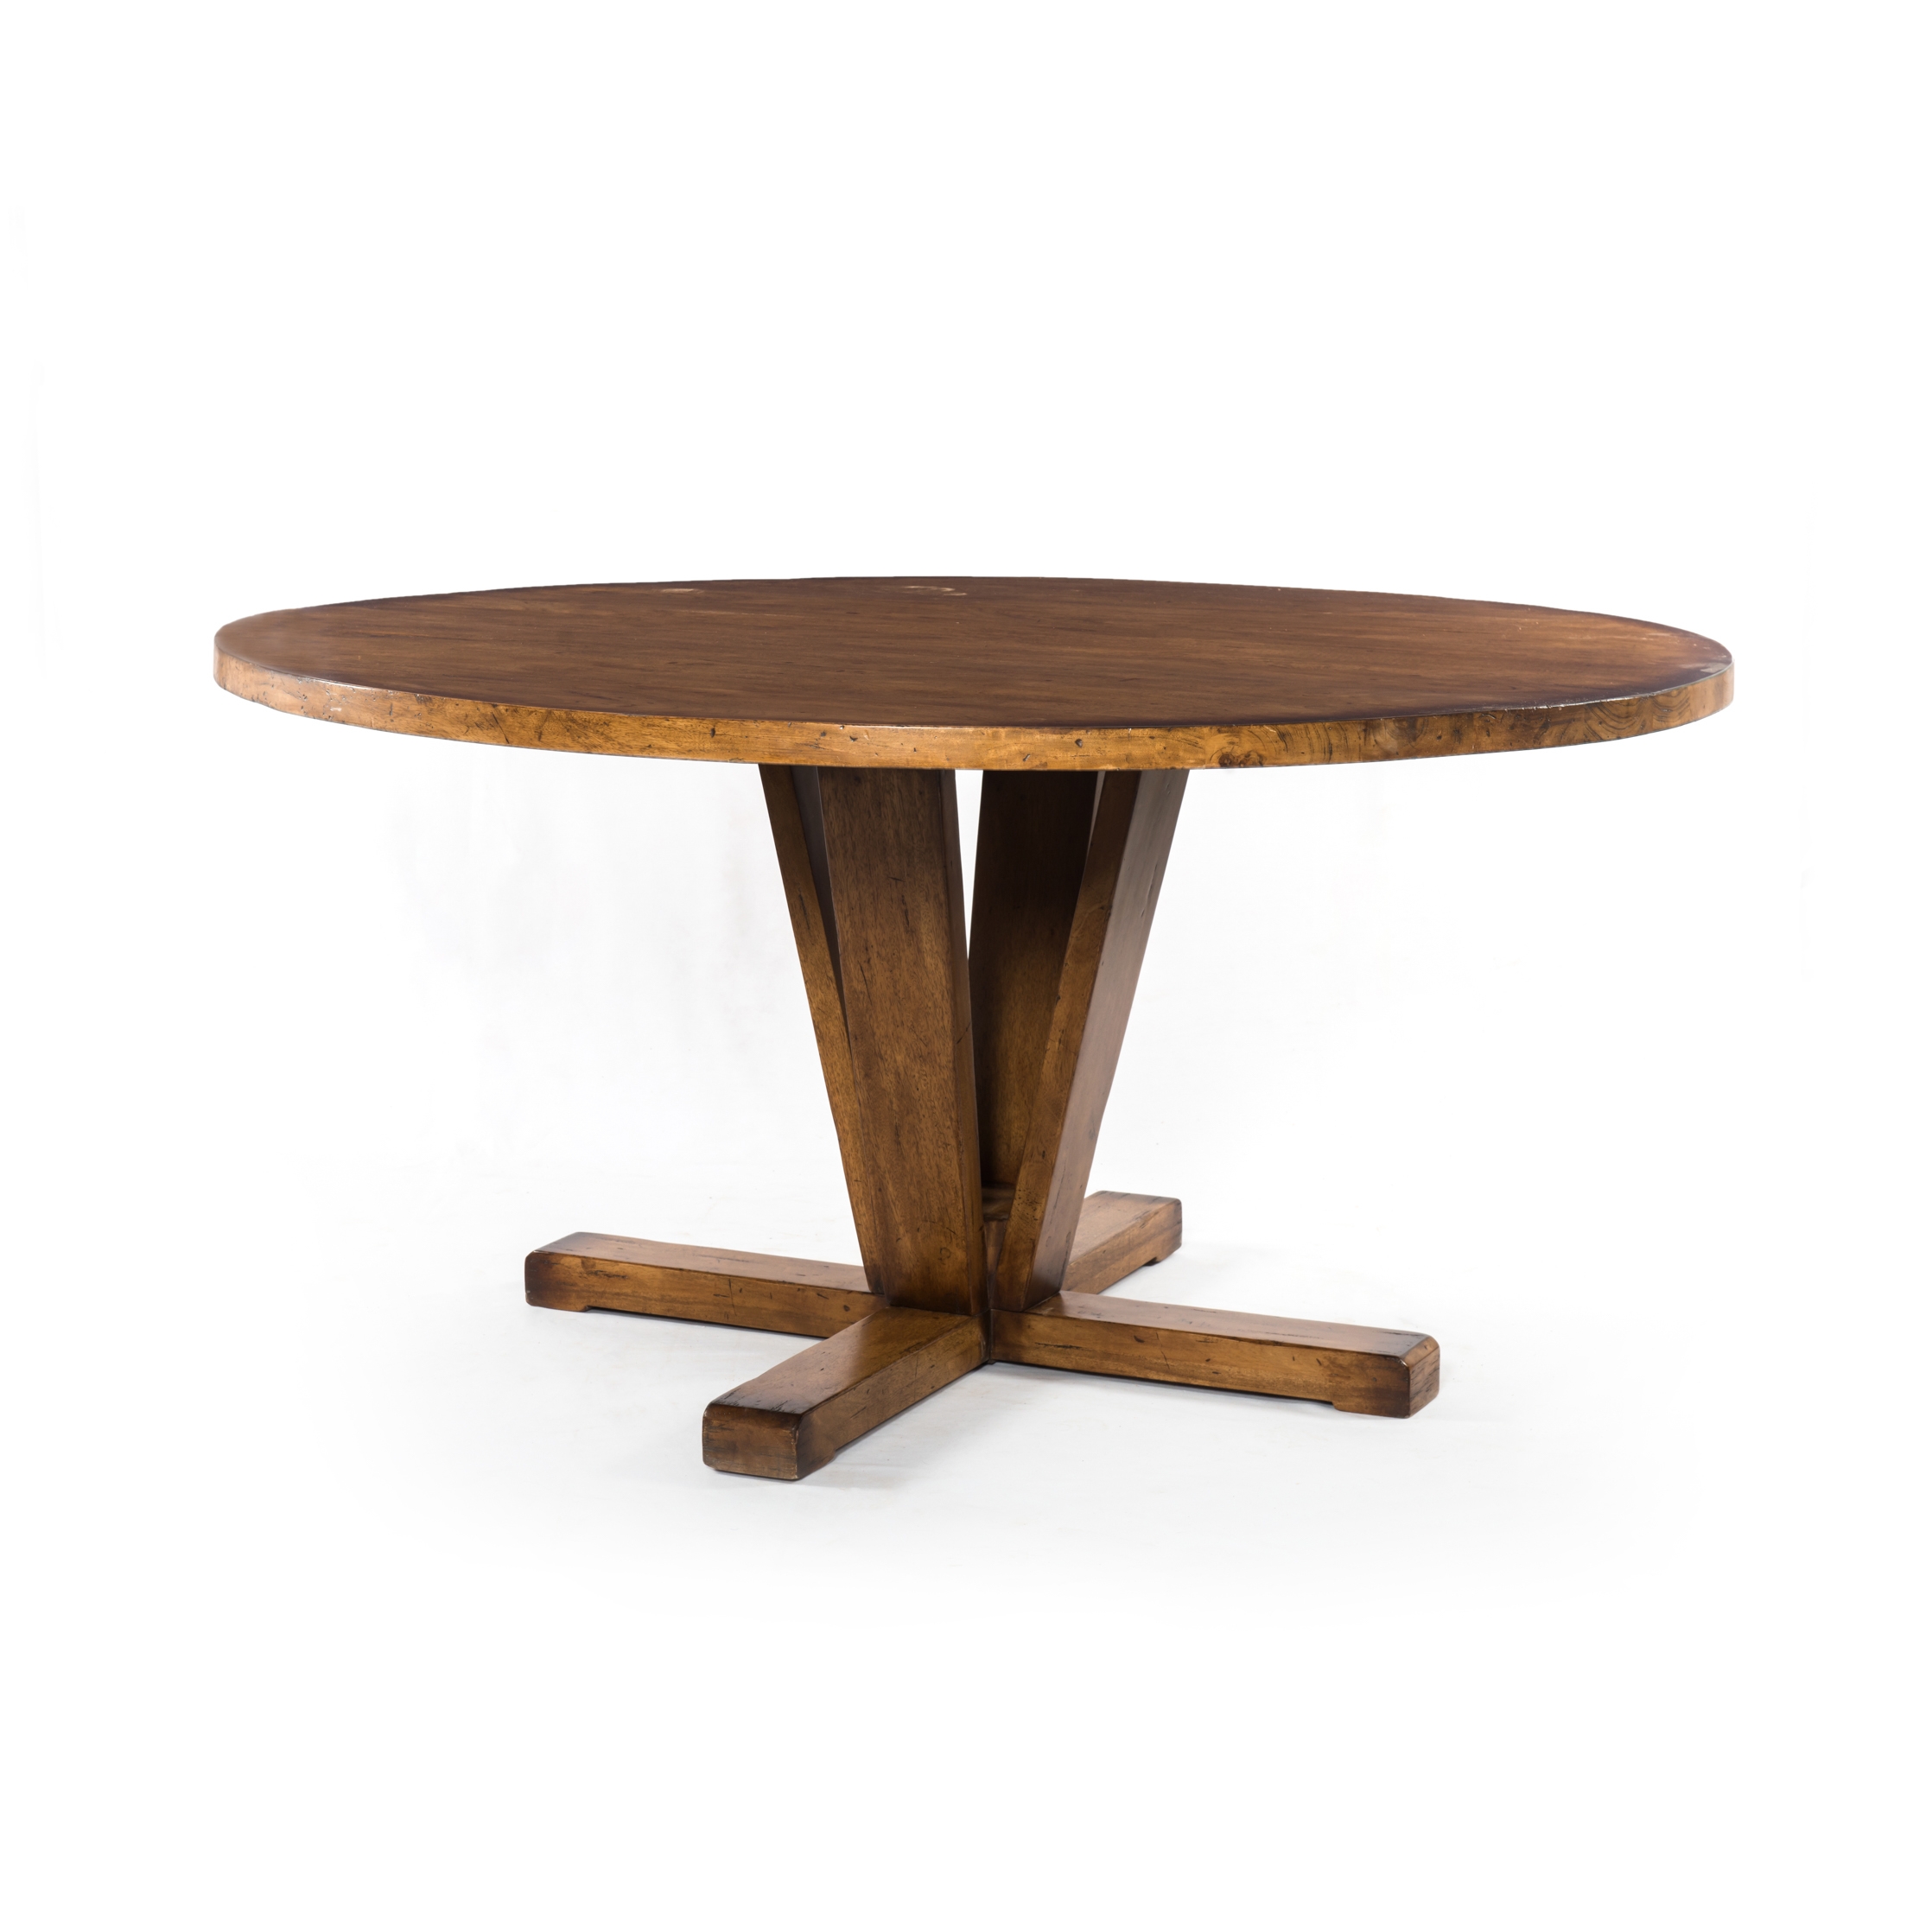 Cobain Dining Table - Image 1